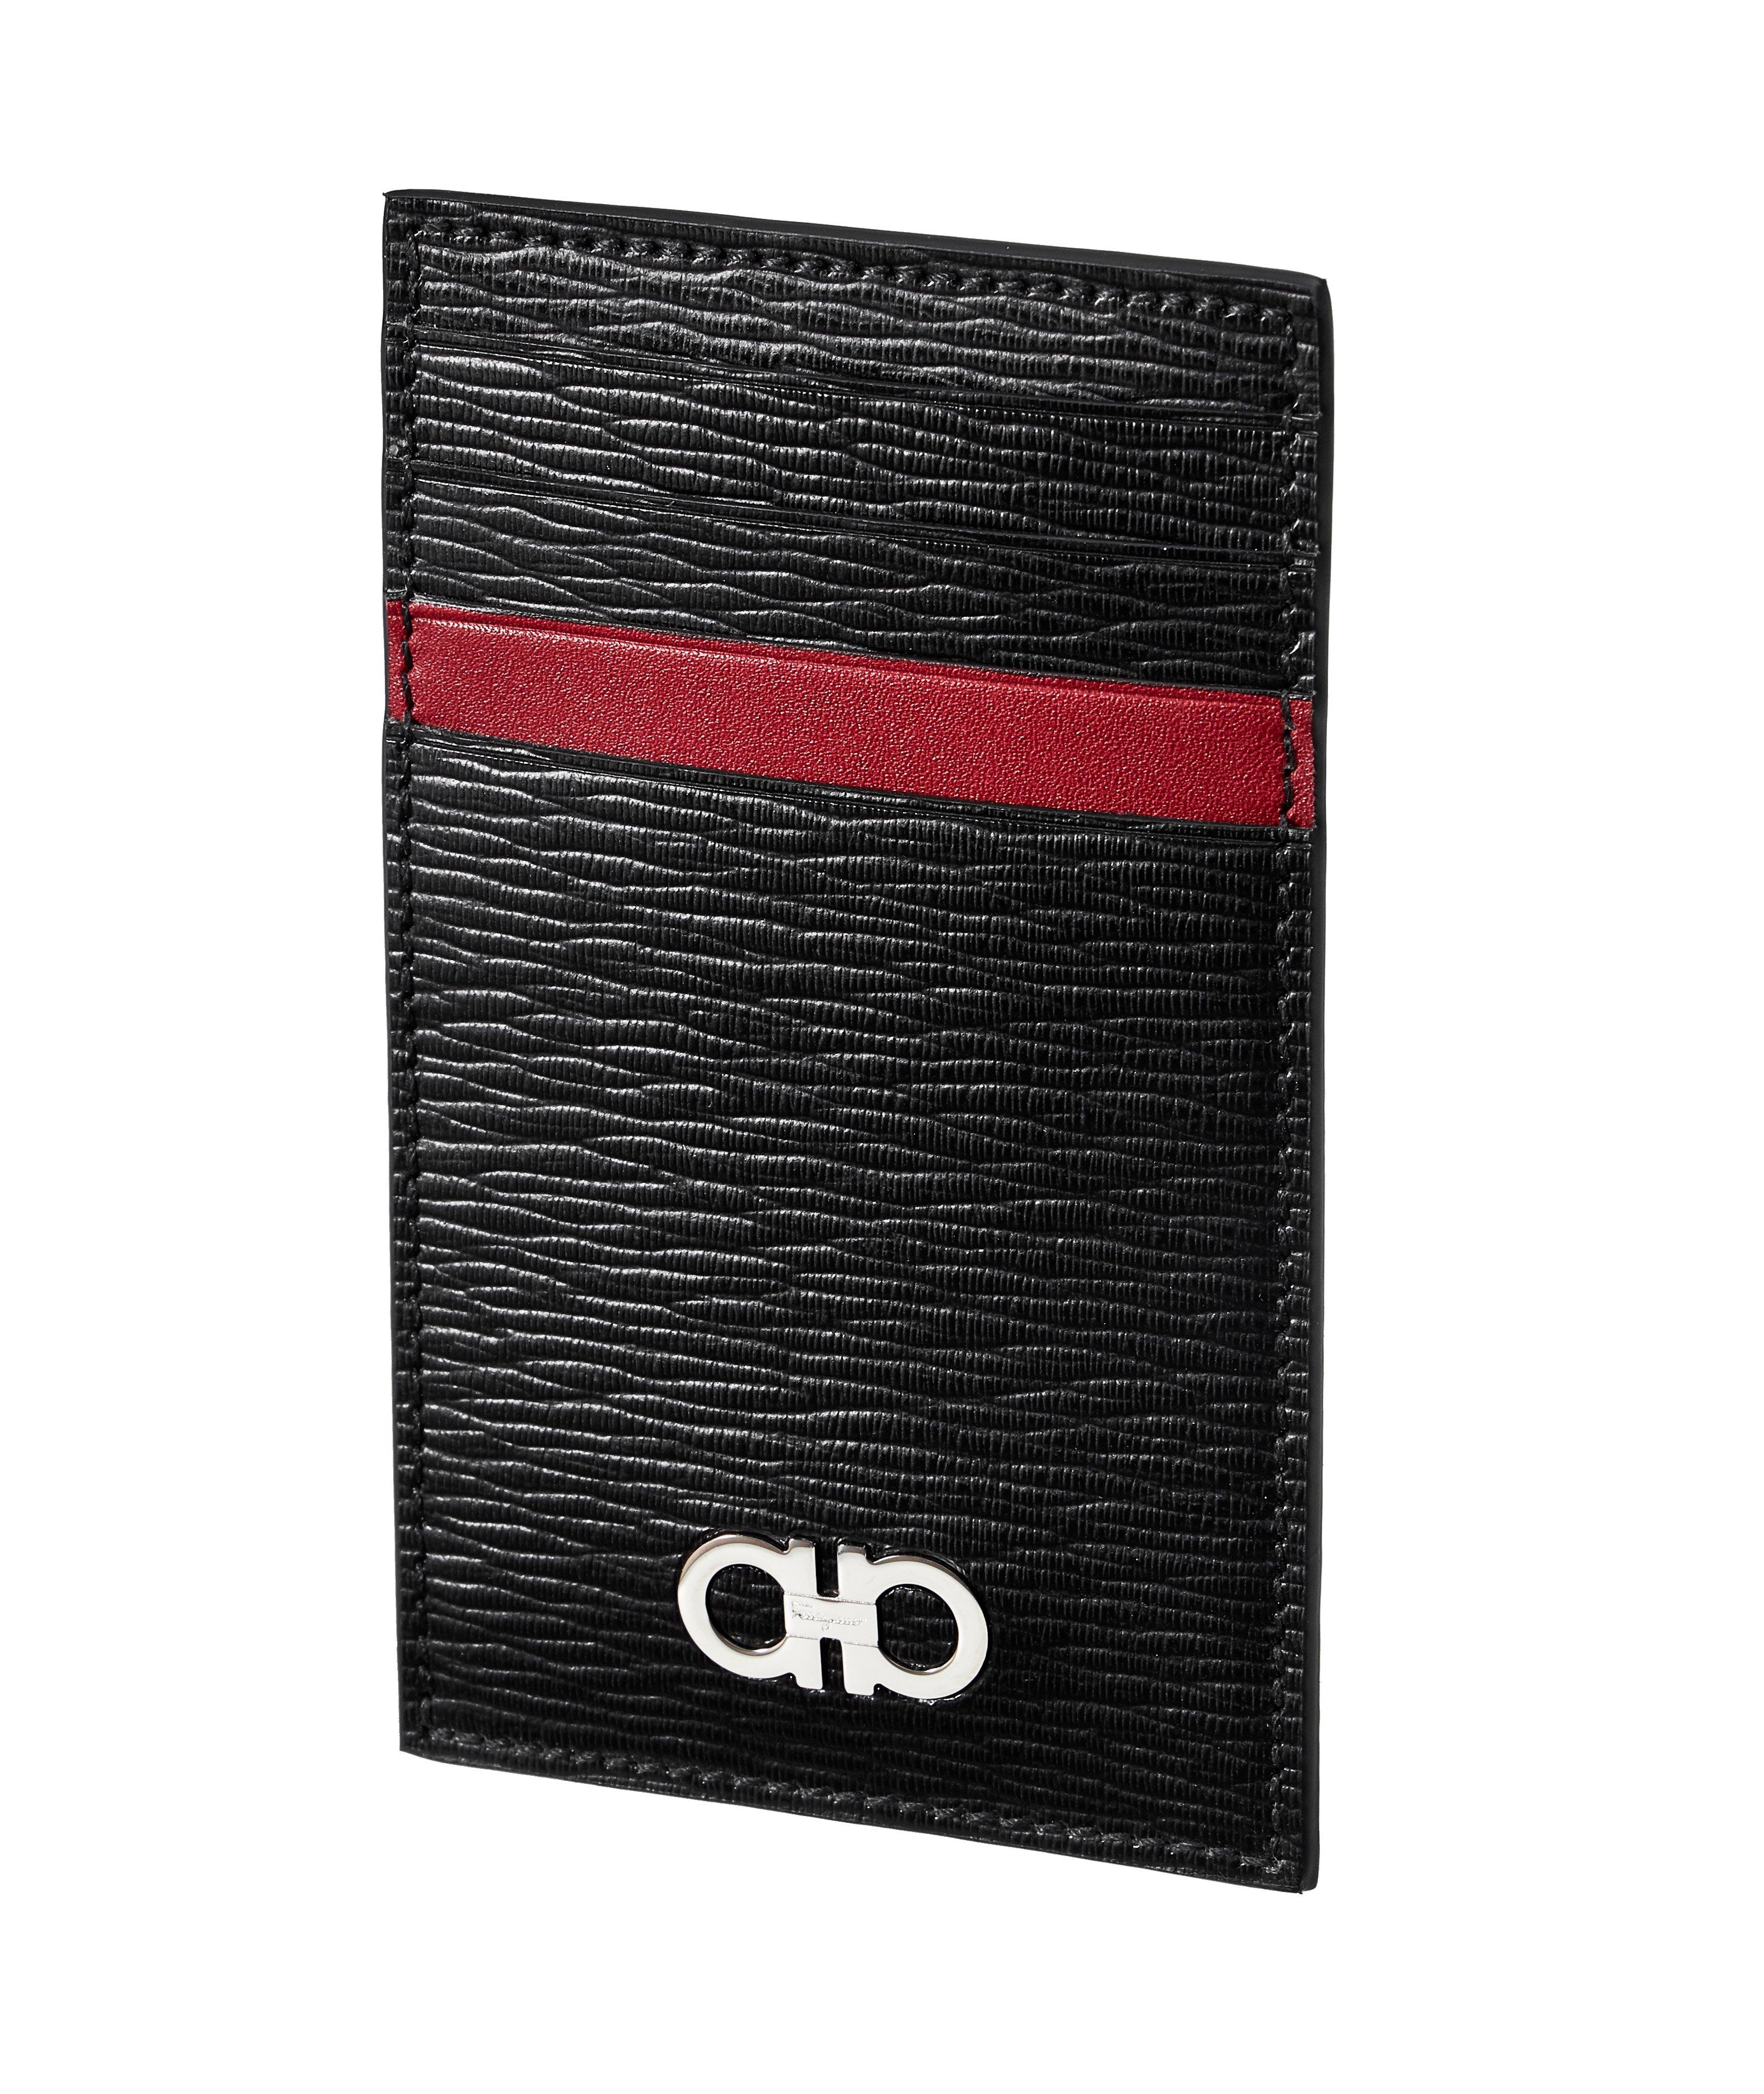 Leather Cardholder with Money Clip image 0